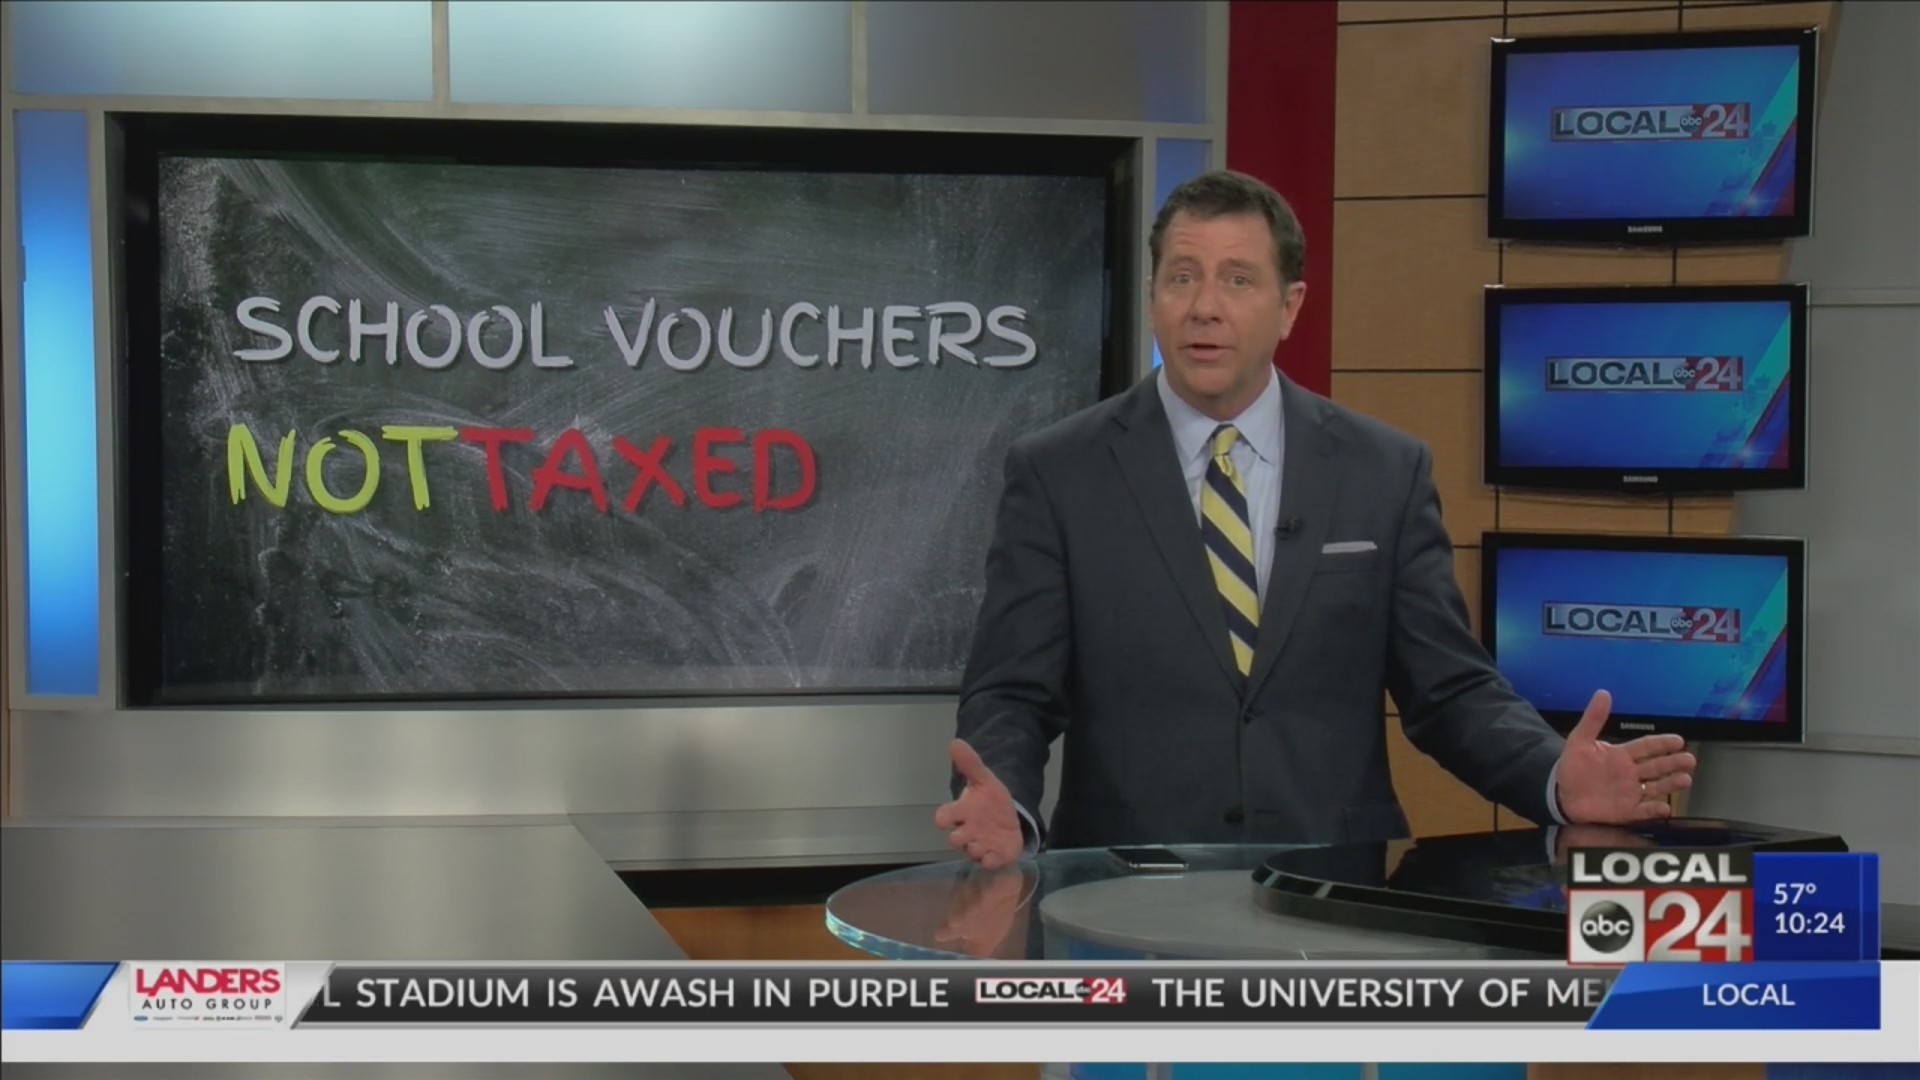 Reversing course, Tennessee’s Department of Education wants to make its school vouchers not taxable